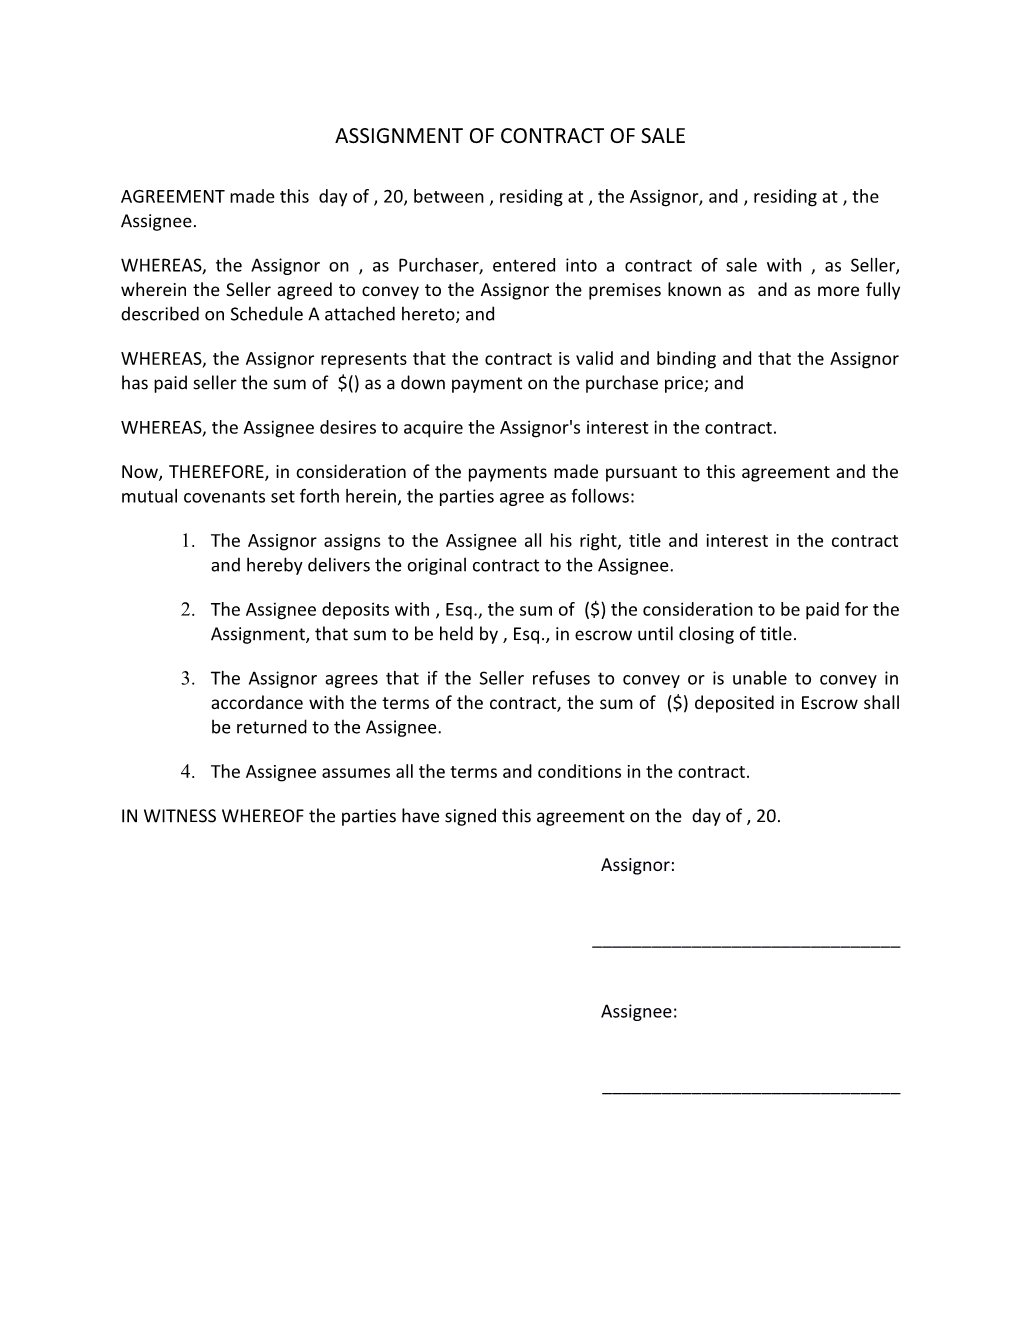 Assignment of Contract of Sale